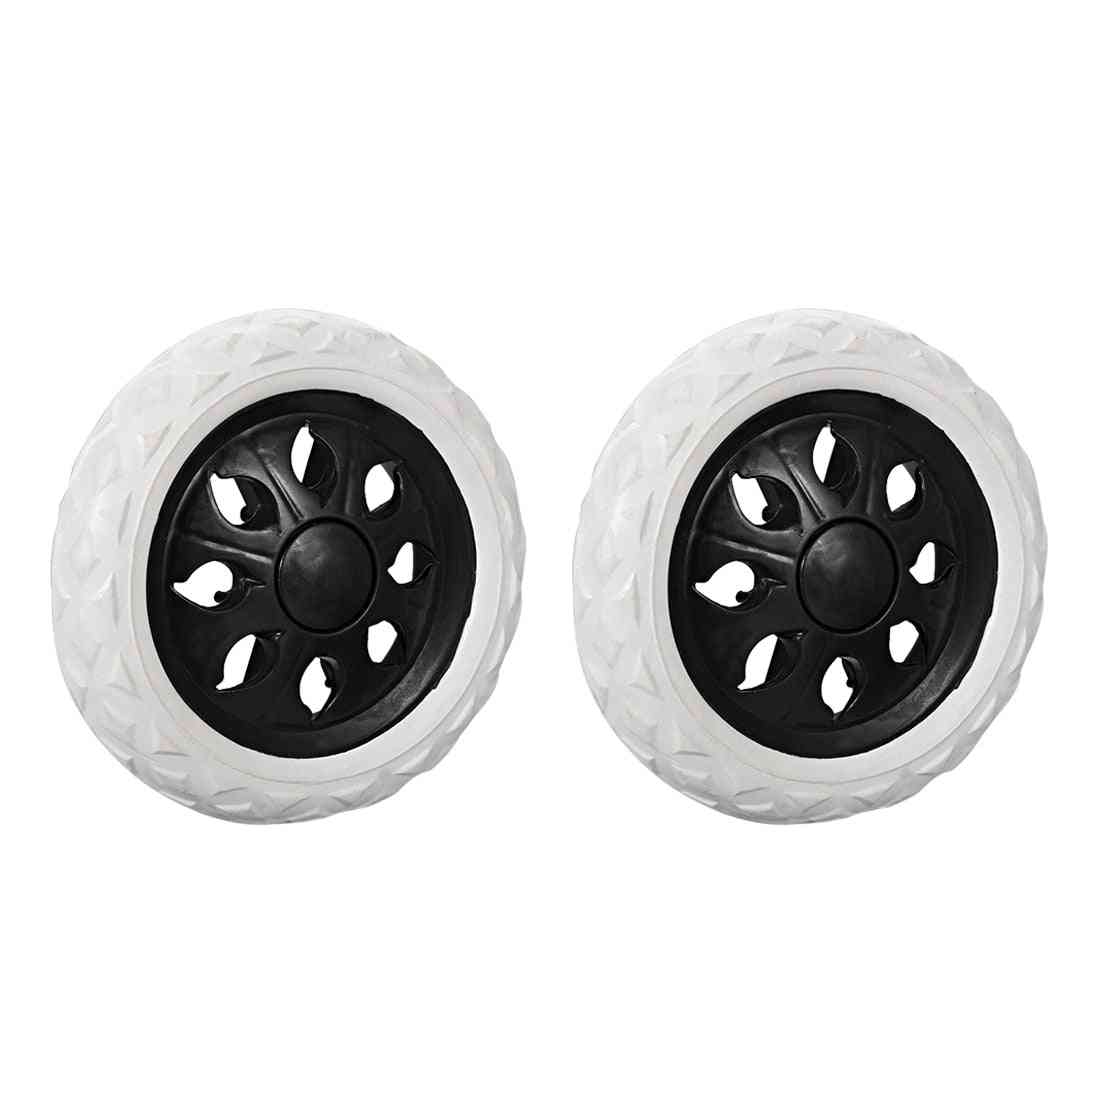 2pcs Shopping Trolley Caster Replacement Wheels